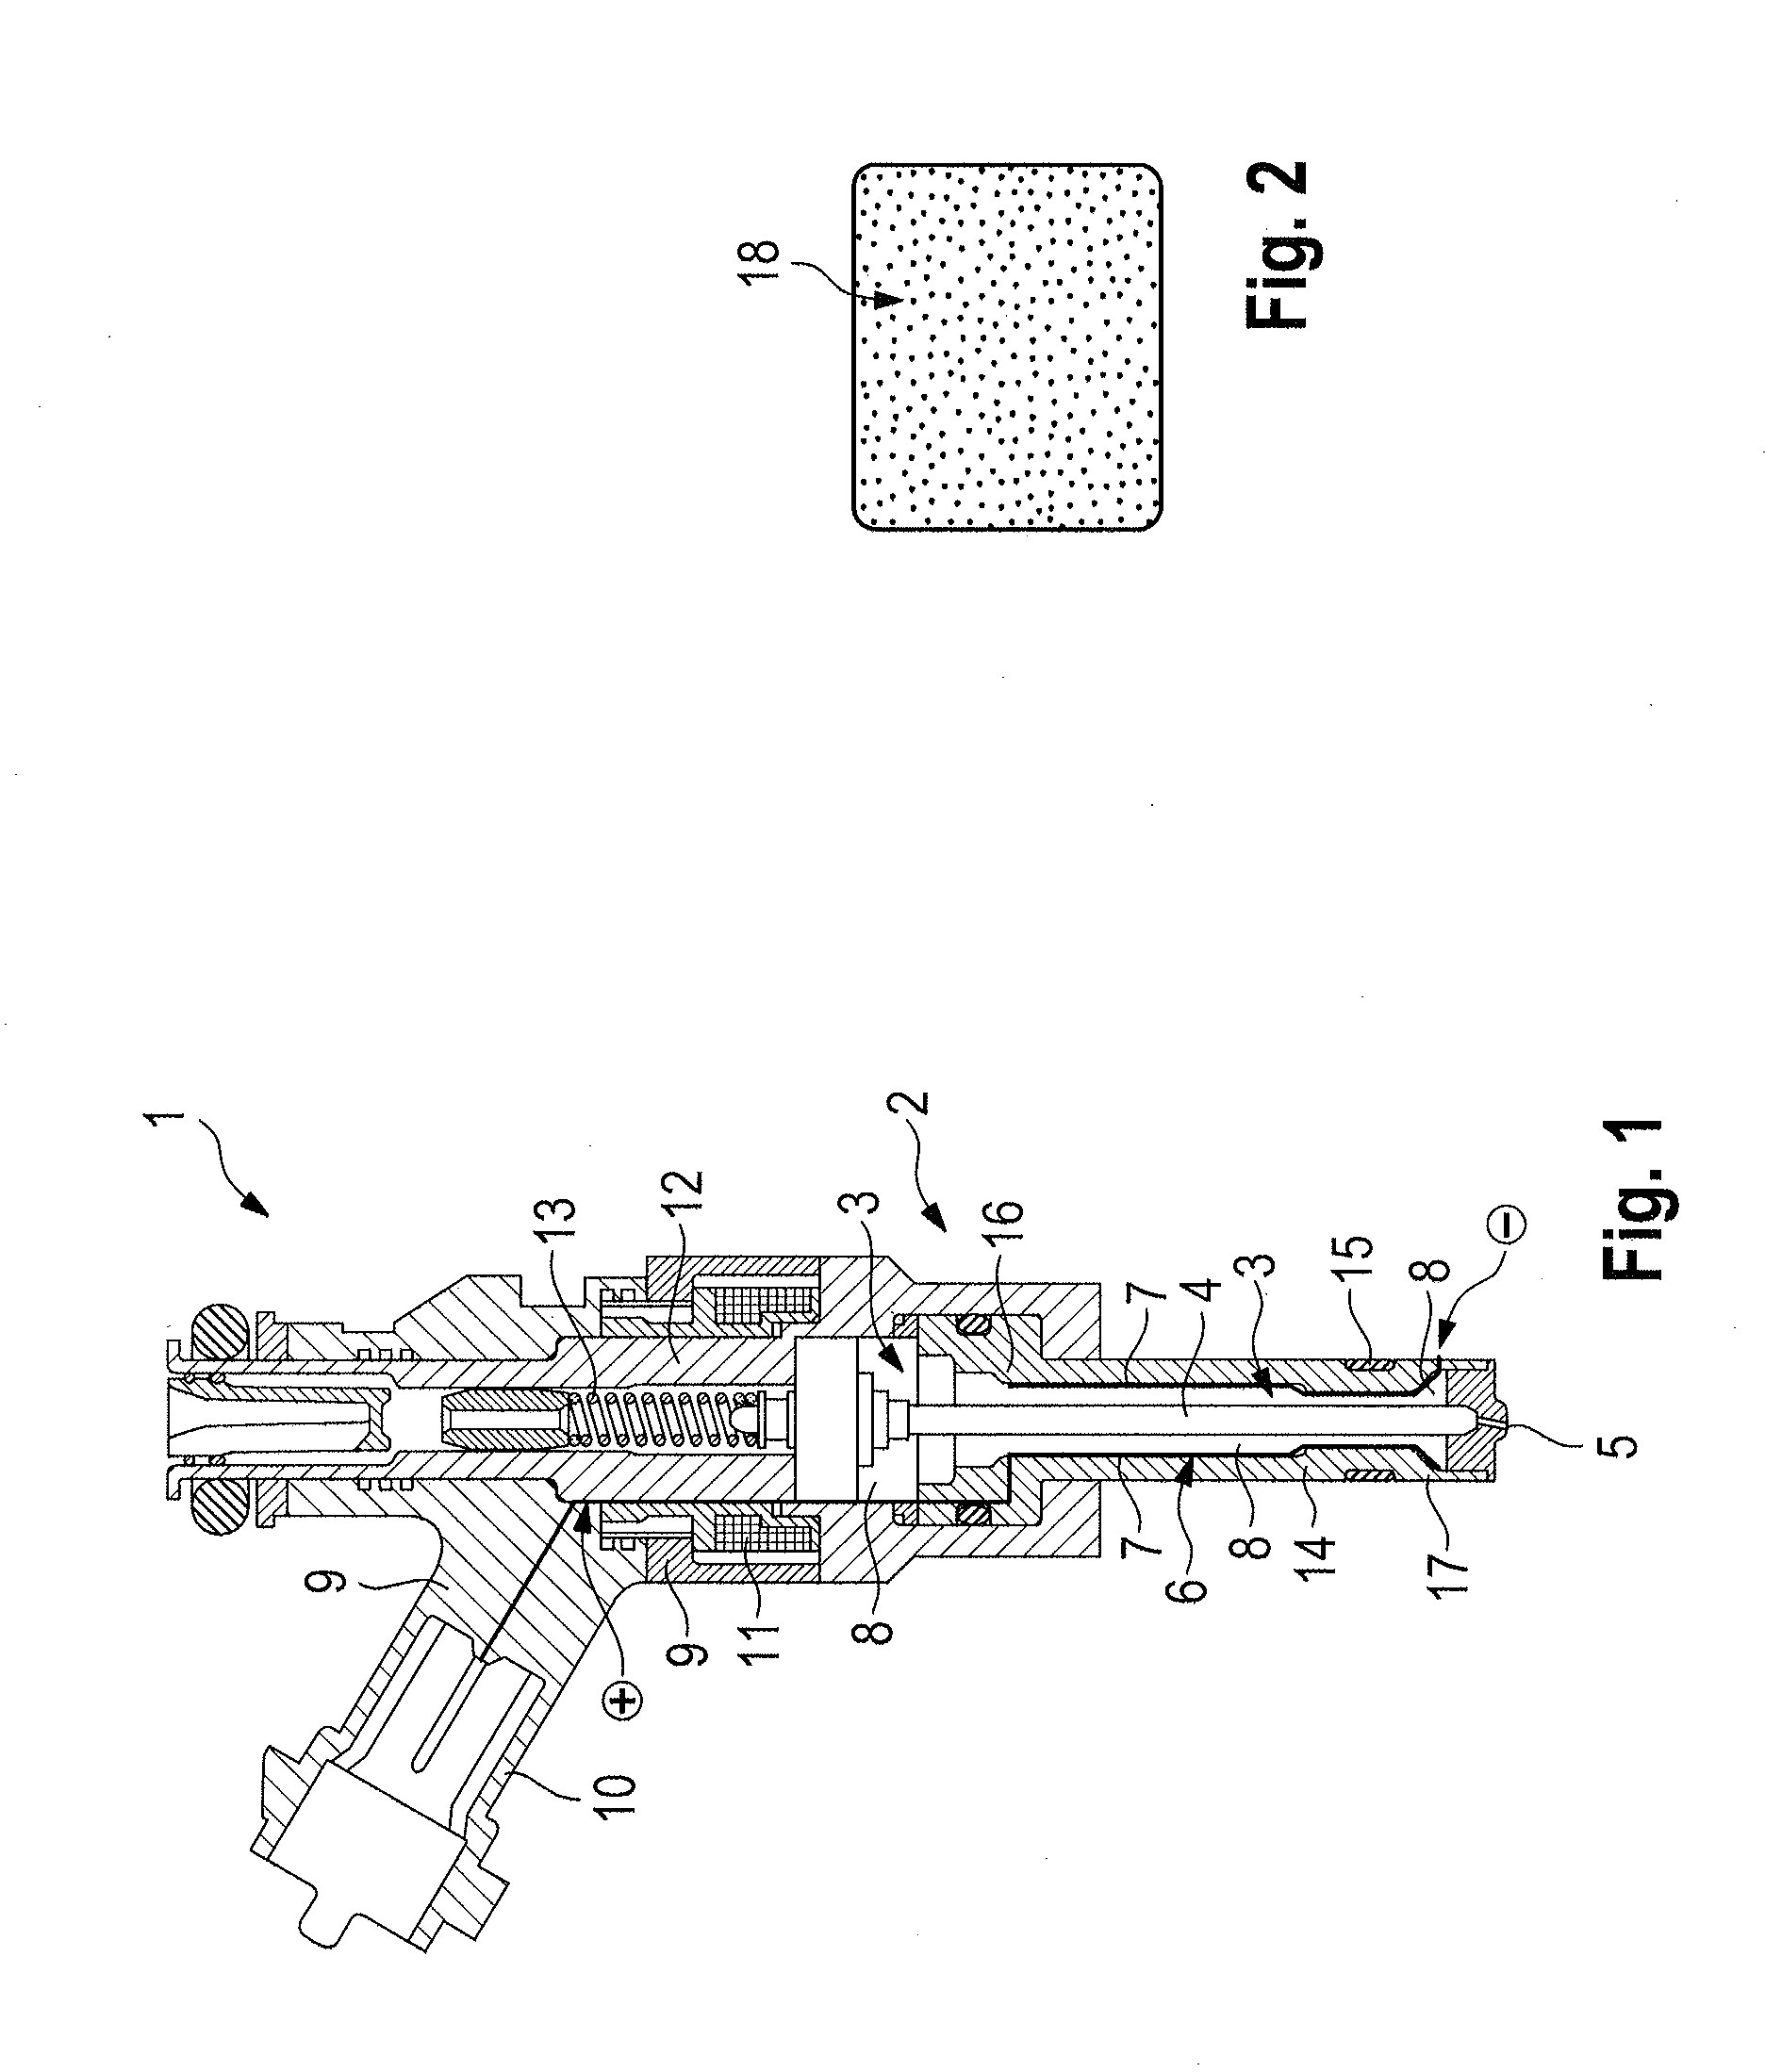 Heatable injector for fuel injection in an internal combustion engine